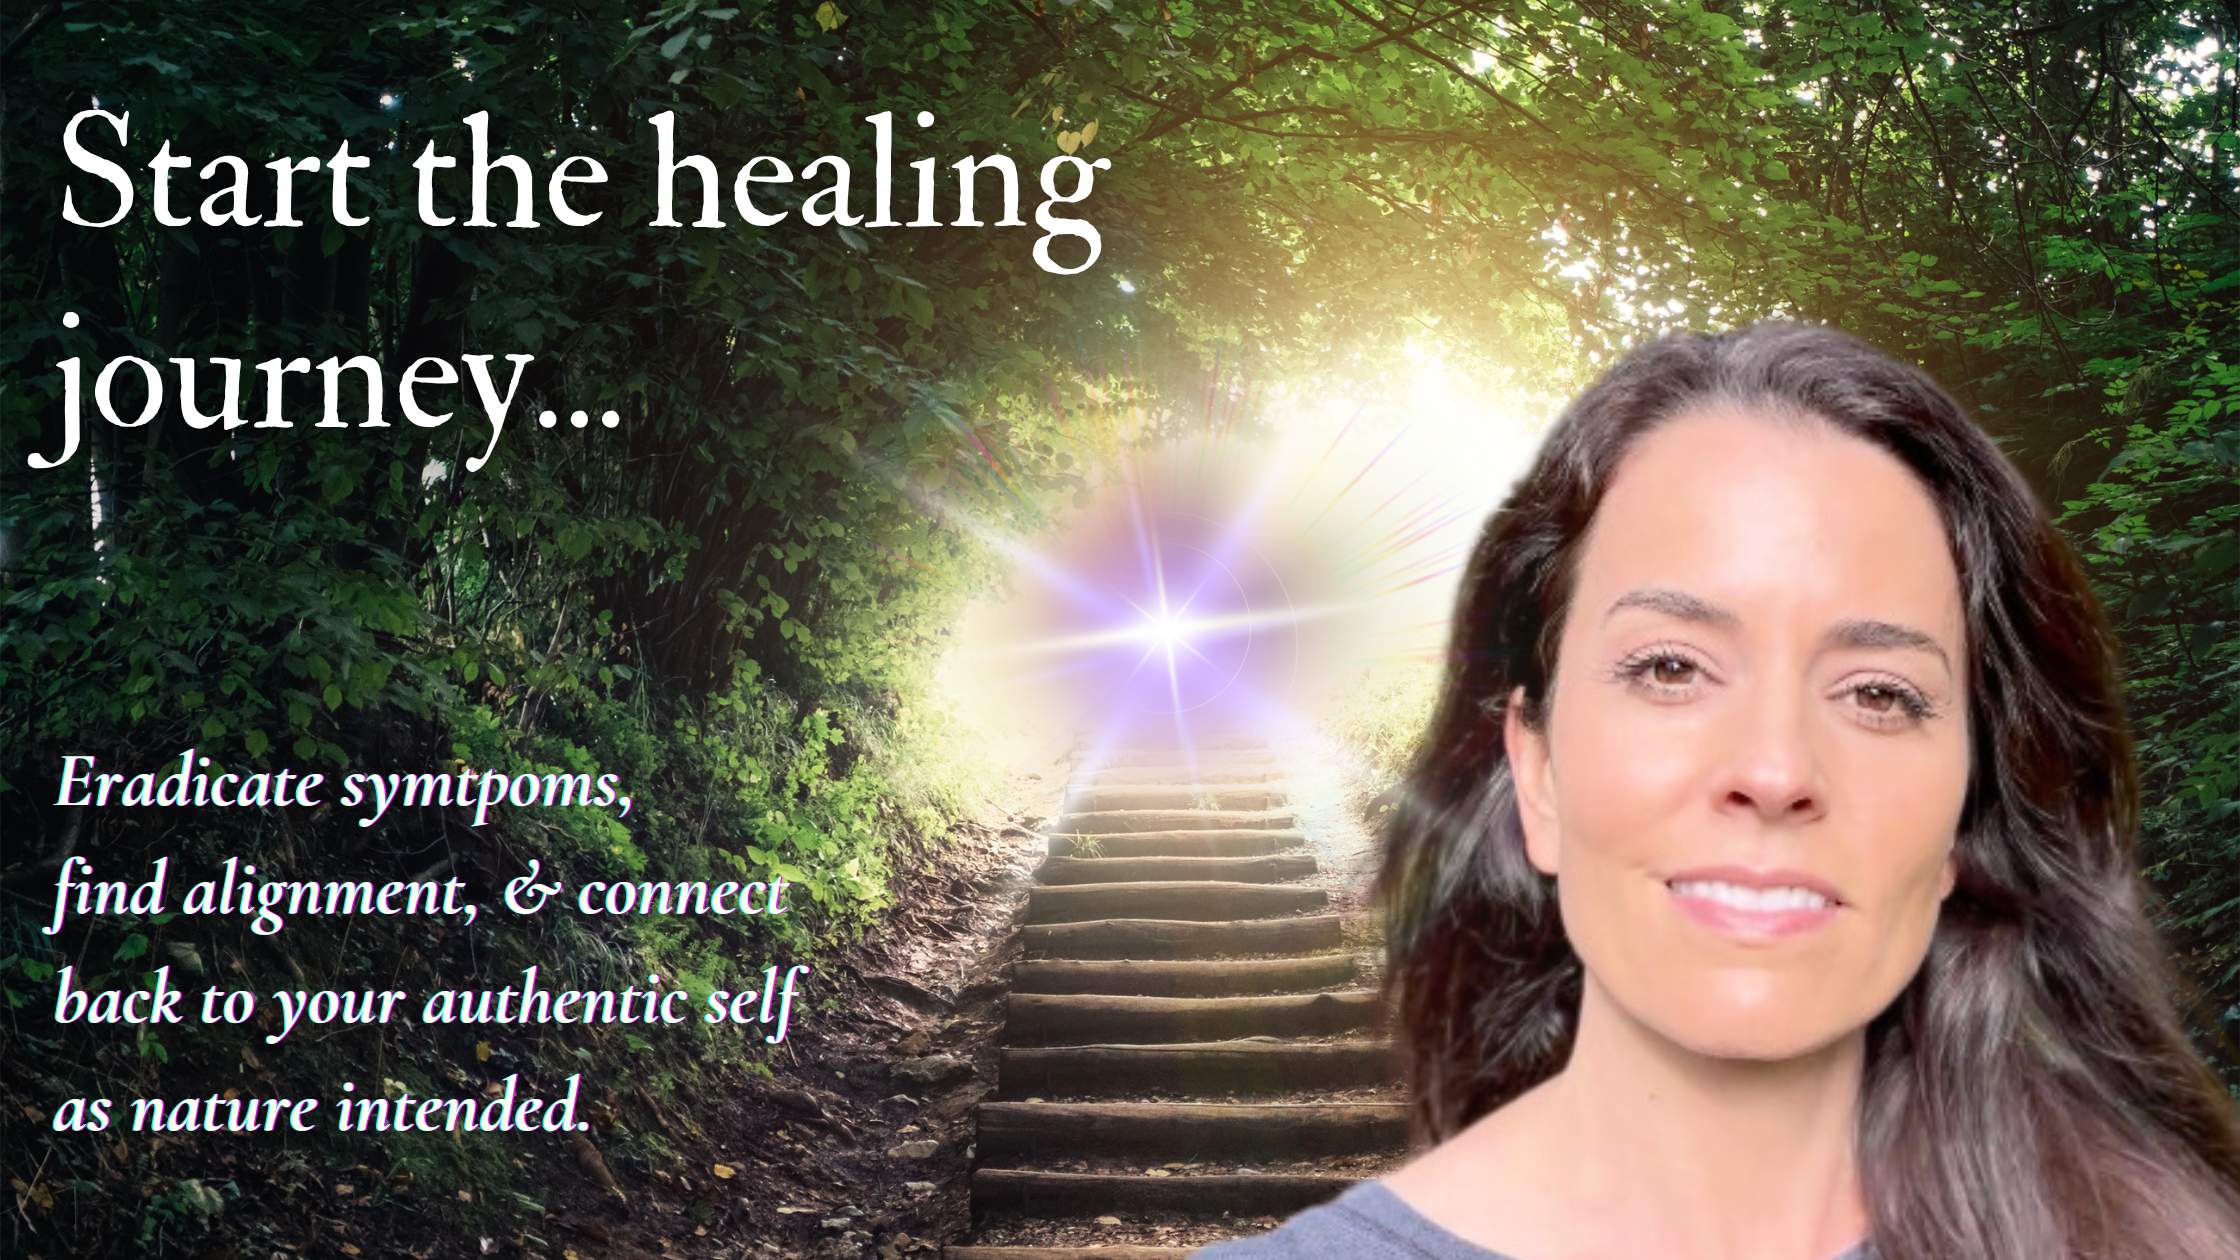 Online Courses holistic health coaching designed to self-heal symptoms and disease naturally.